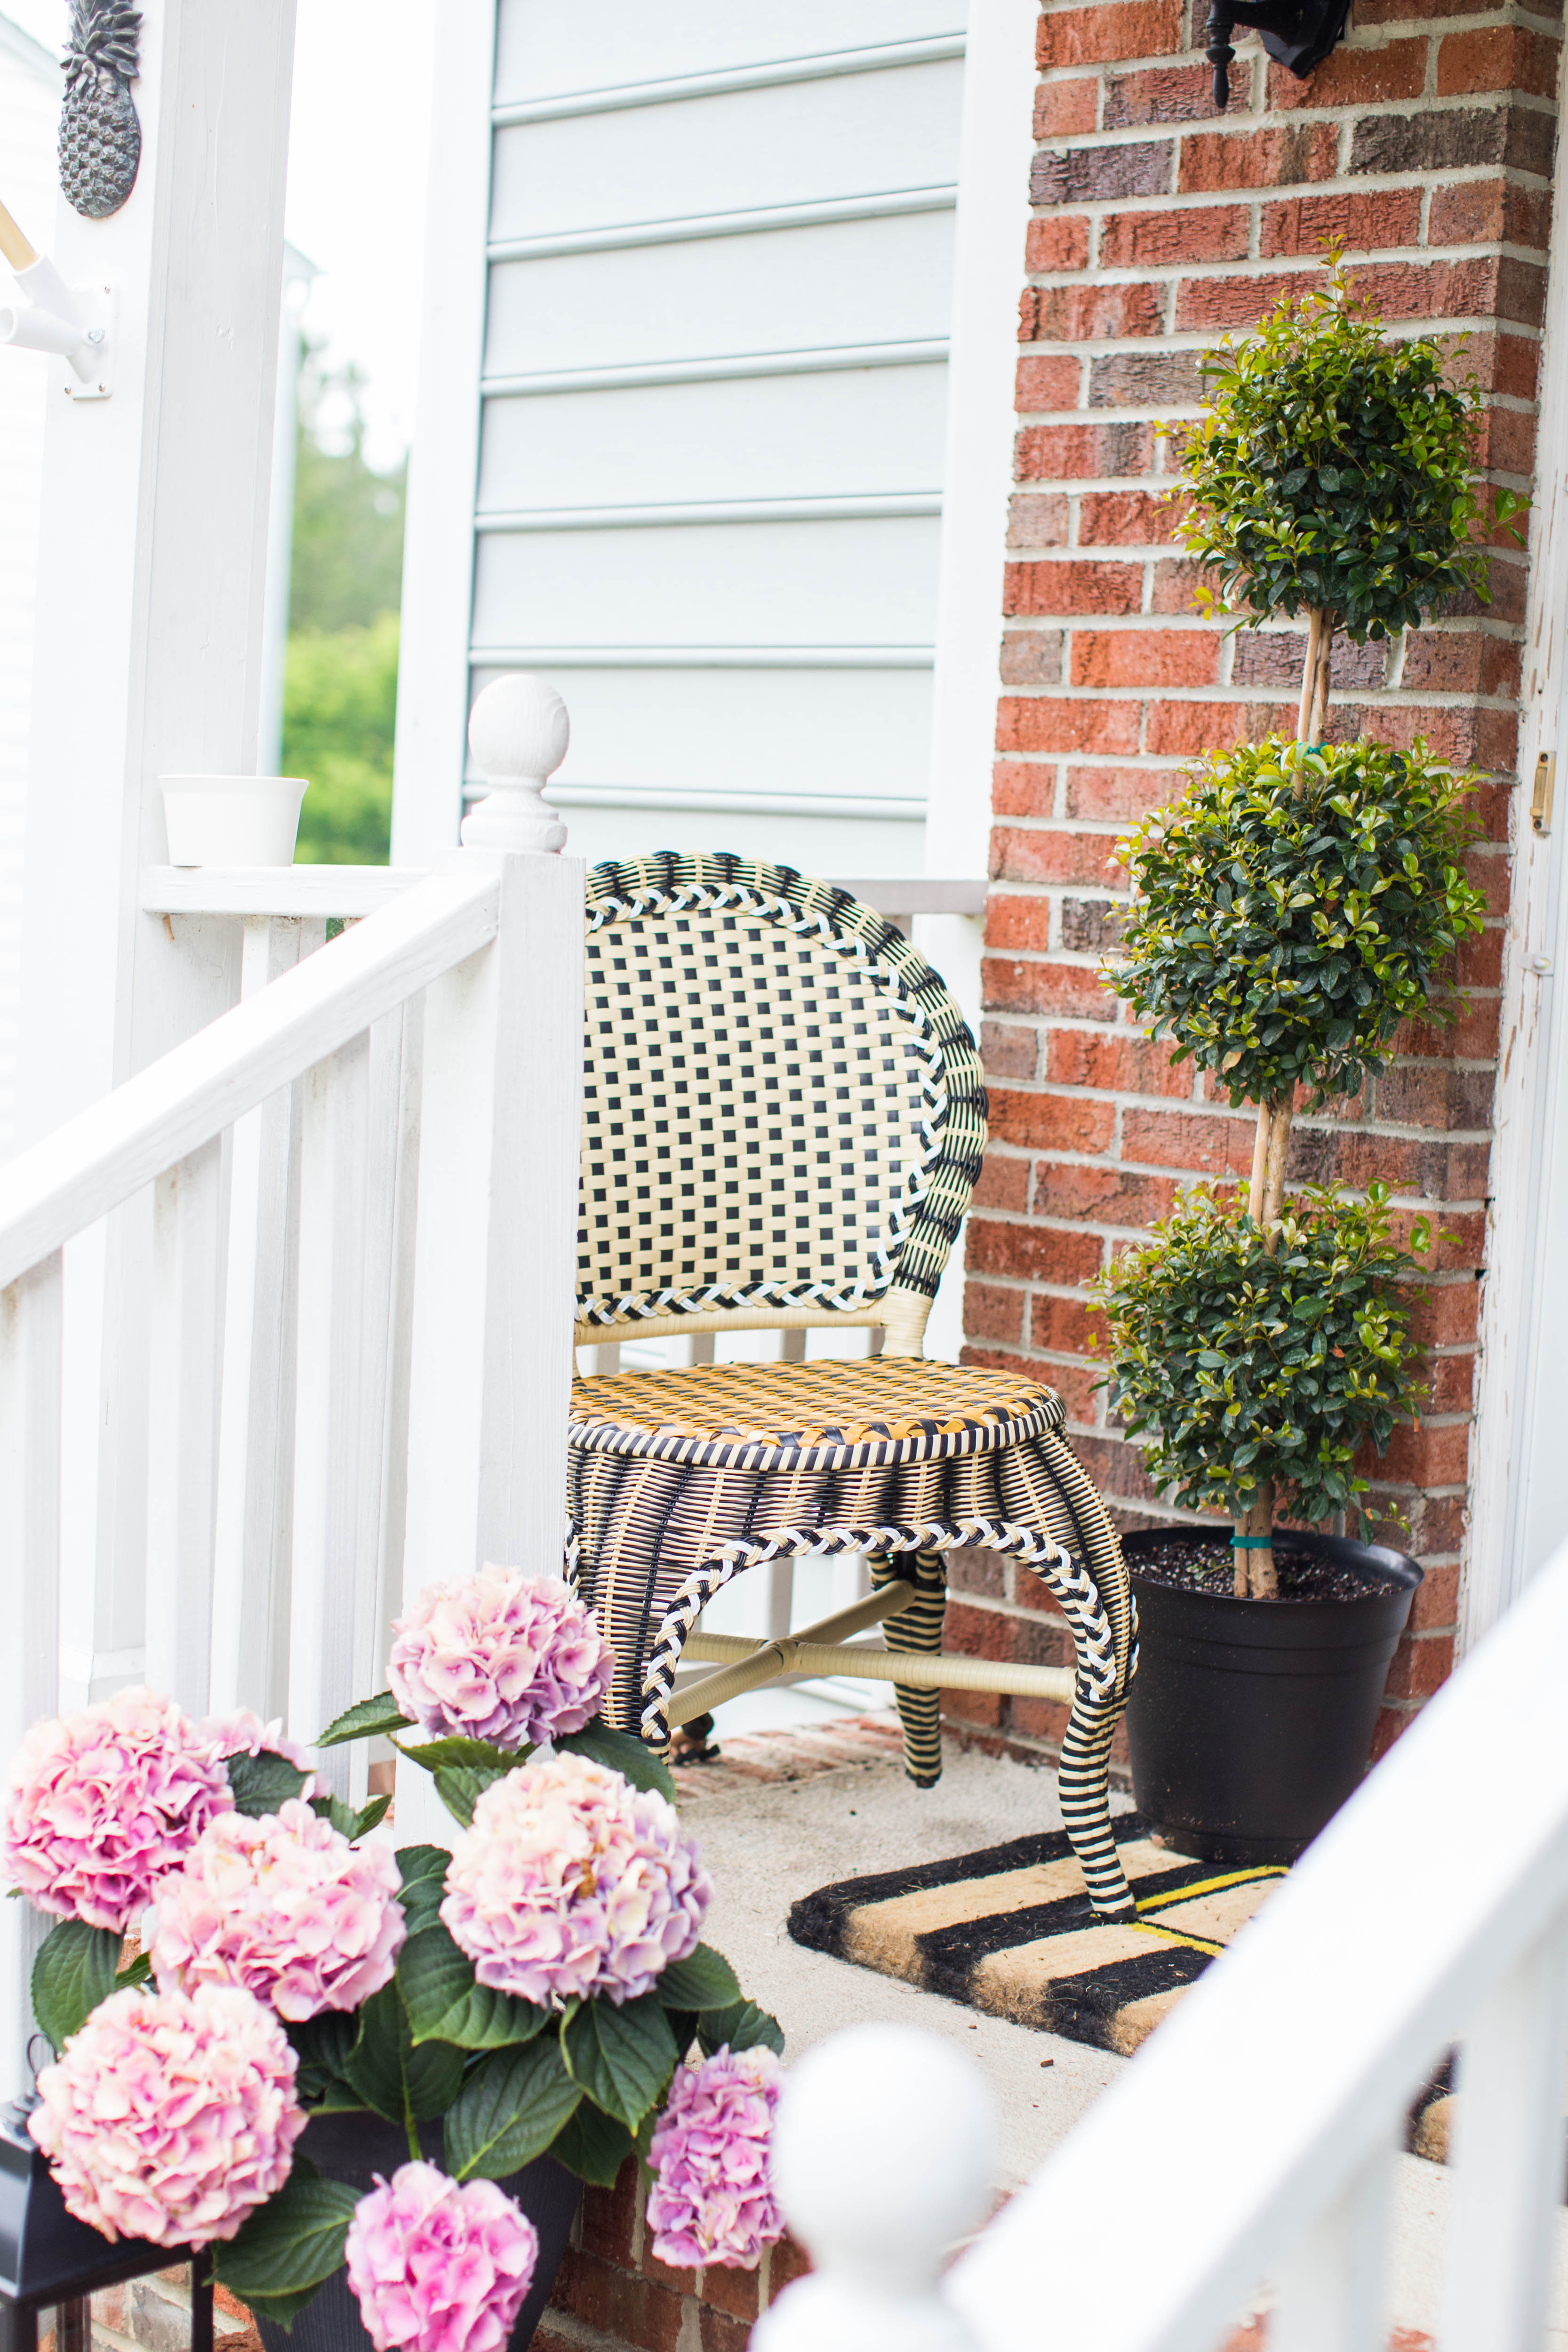 small front porch ideas